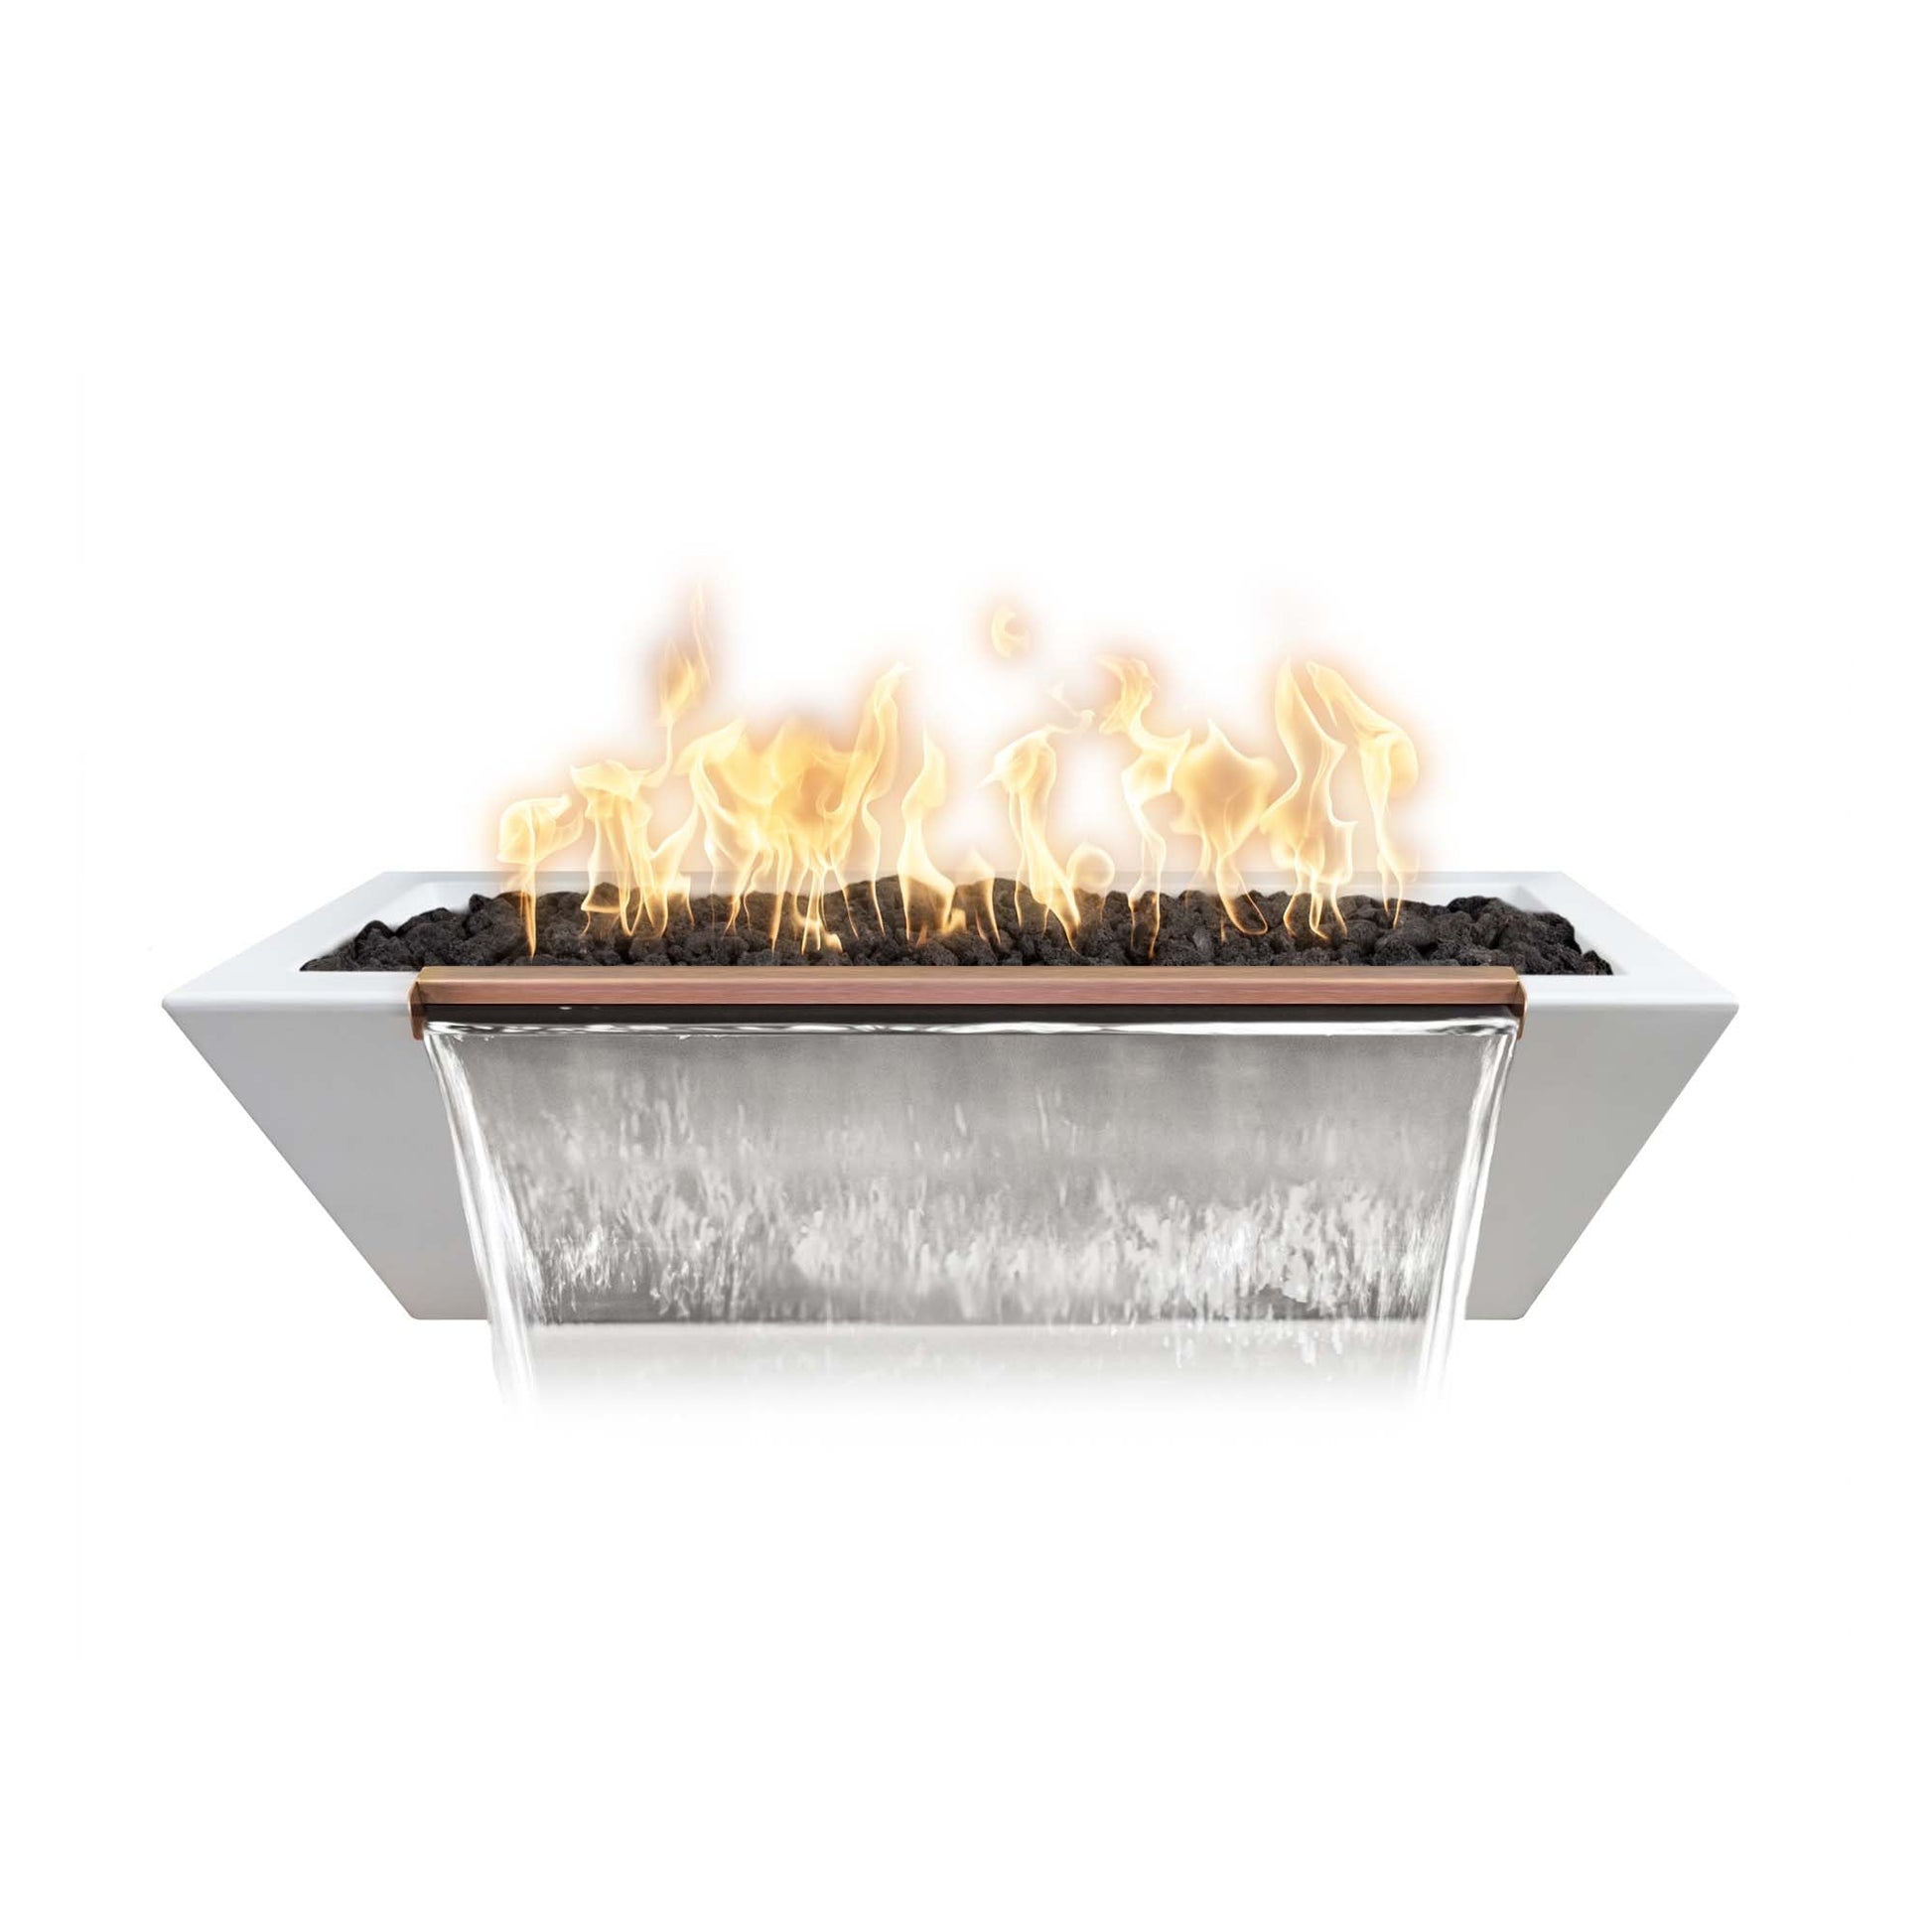 The Outdoor Plus Linear Maya 72" Natural Gray GFRC Concrete Natural Gas Fire & Water Bowl with Match Lit with Flame Sense Ignition